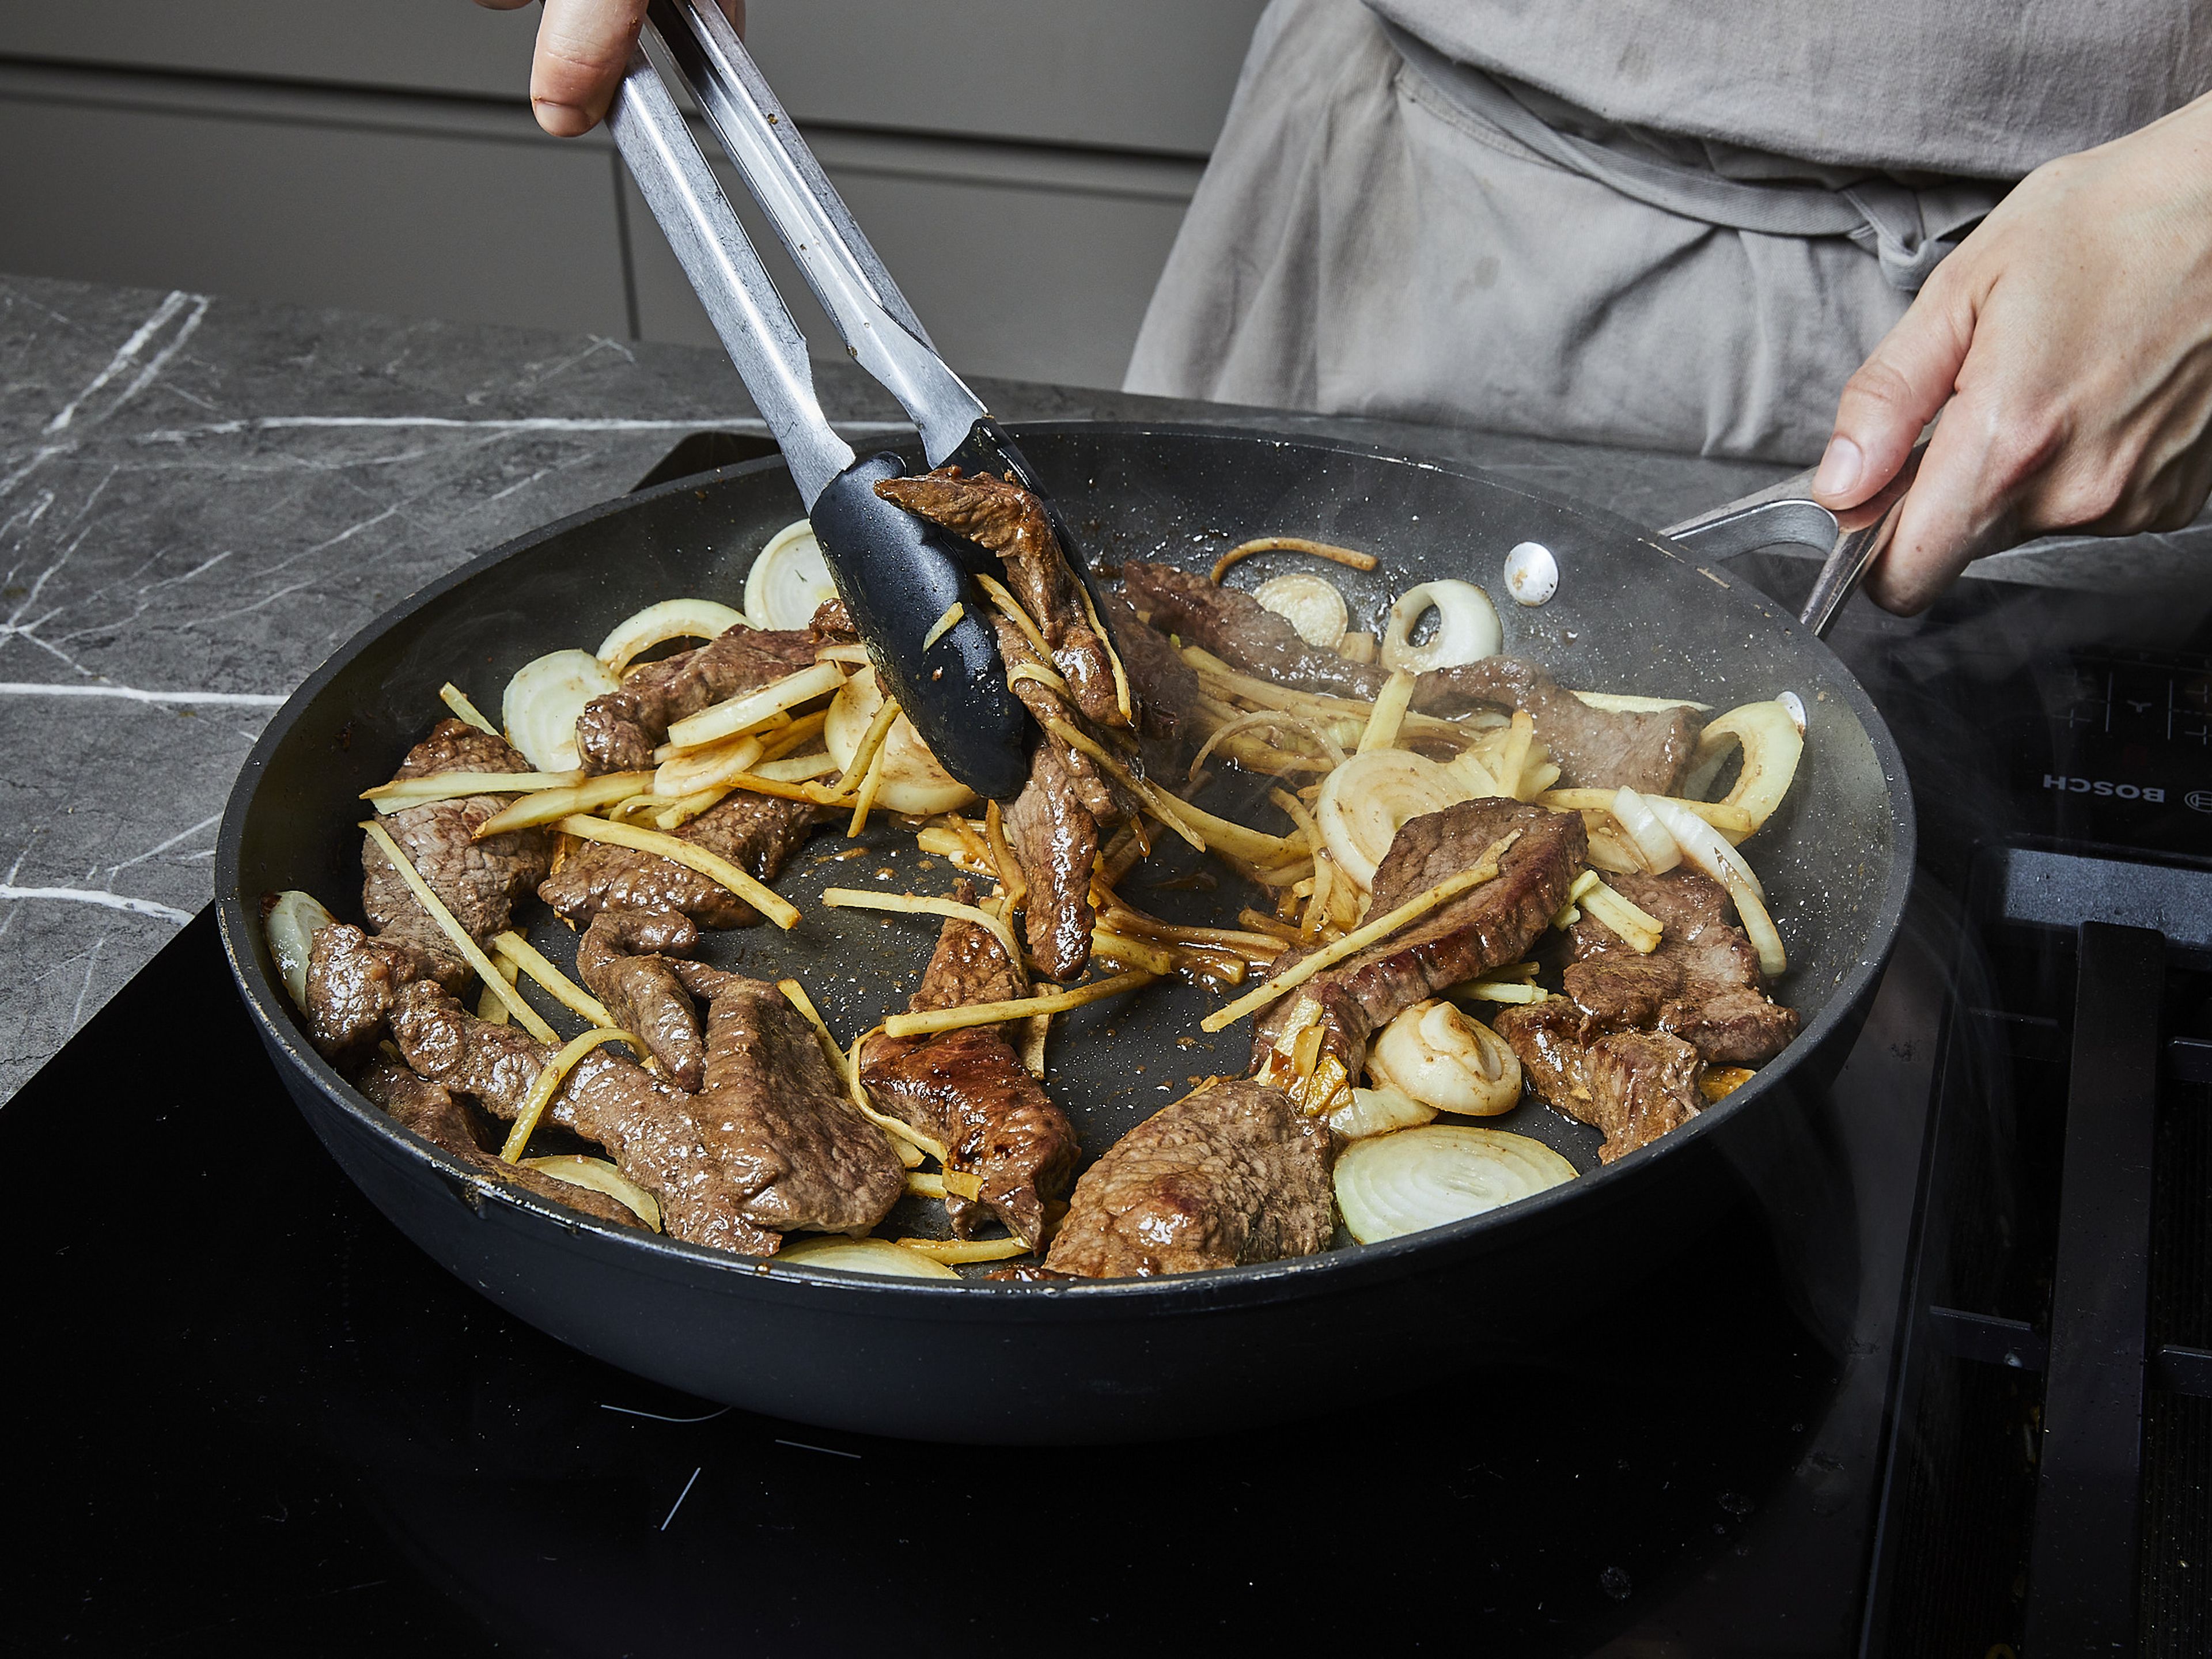 Heat some oil in a pan until very hot. Add beef strips and fry until they brown all over. Add ginger and onion. Fry until onions slightly caramelize on the edges.